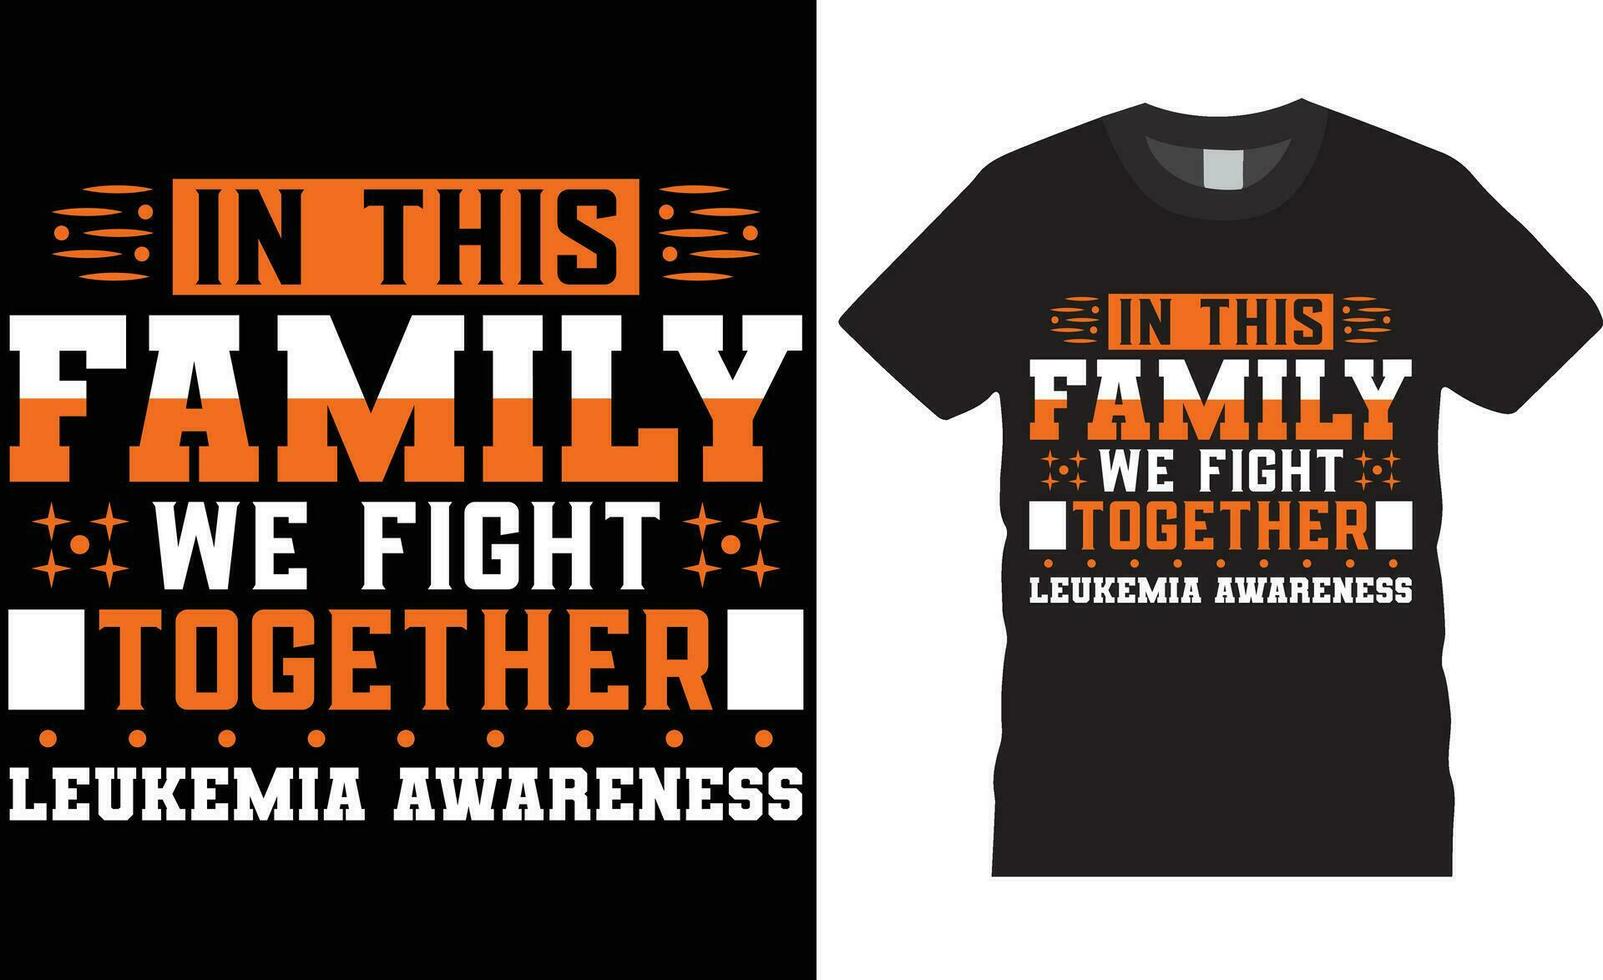 Leukemia awareness Typography t shirt design print for template.In this family we fight together leukemia awareness vector